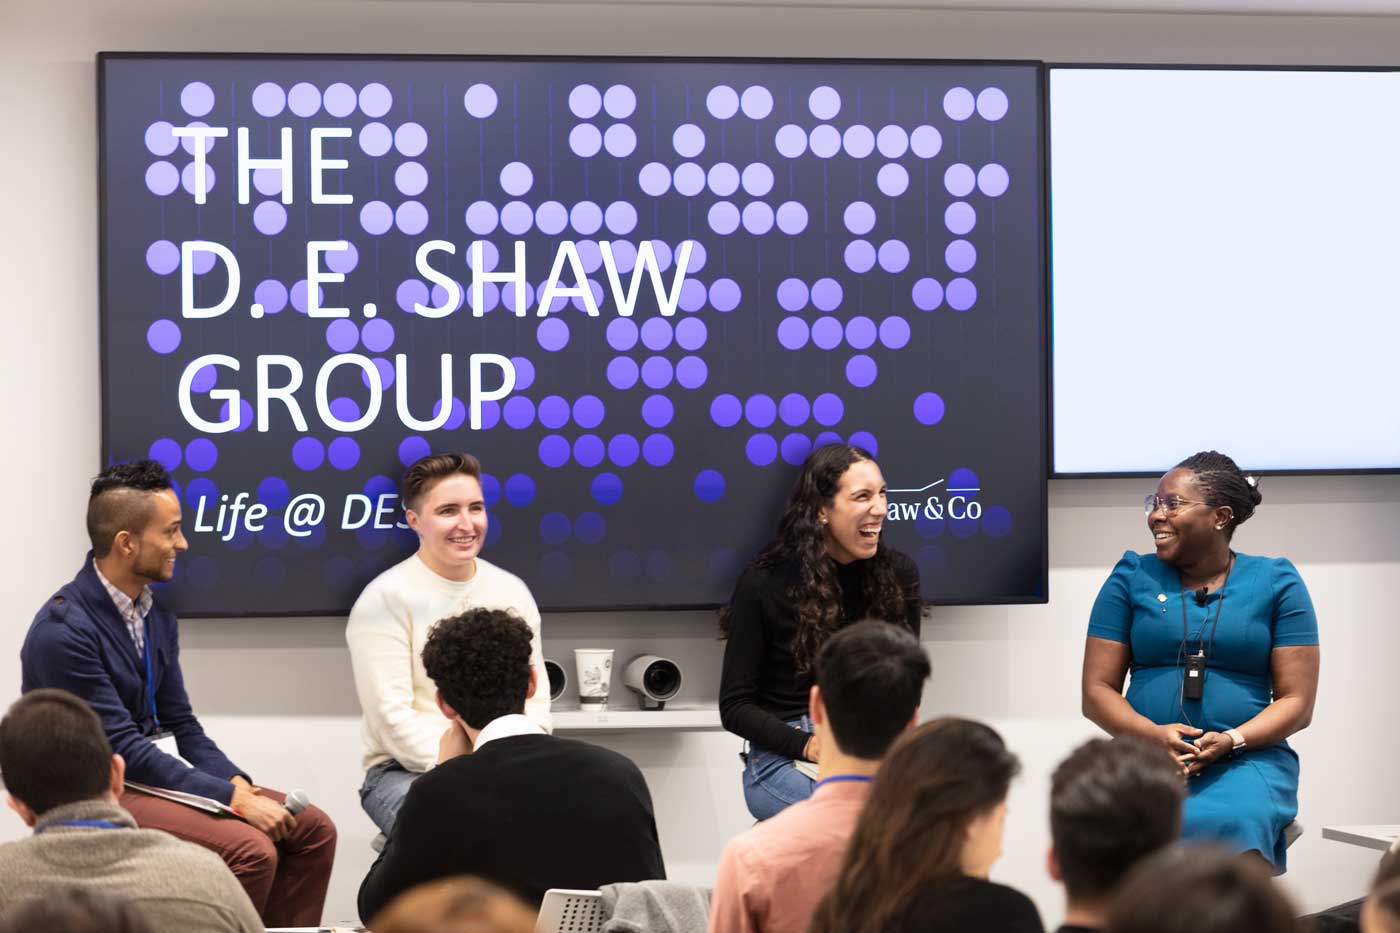 A diverse panel of employees talk about life at the D. E. Shaw group.